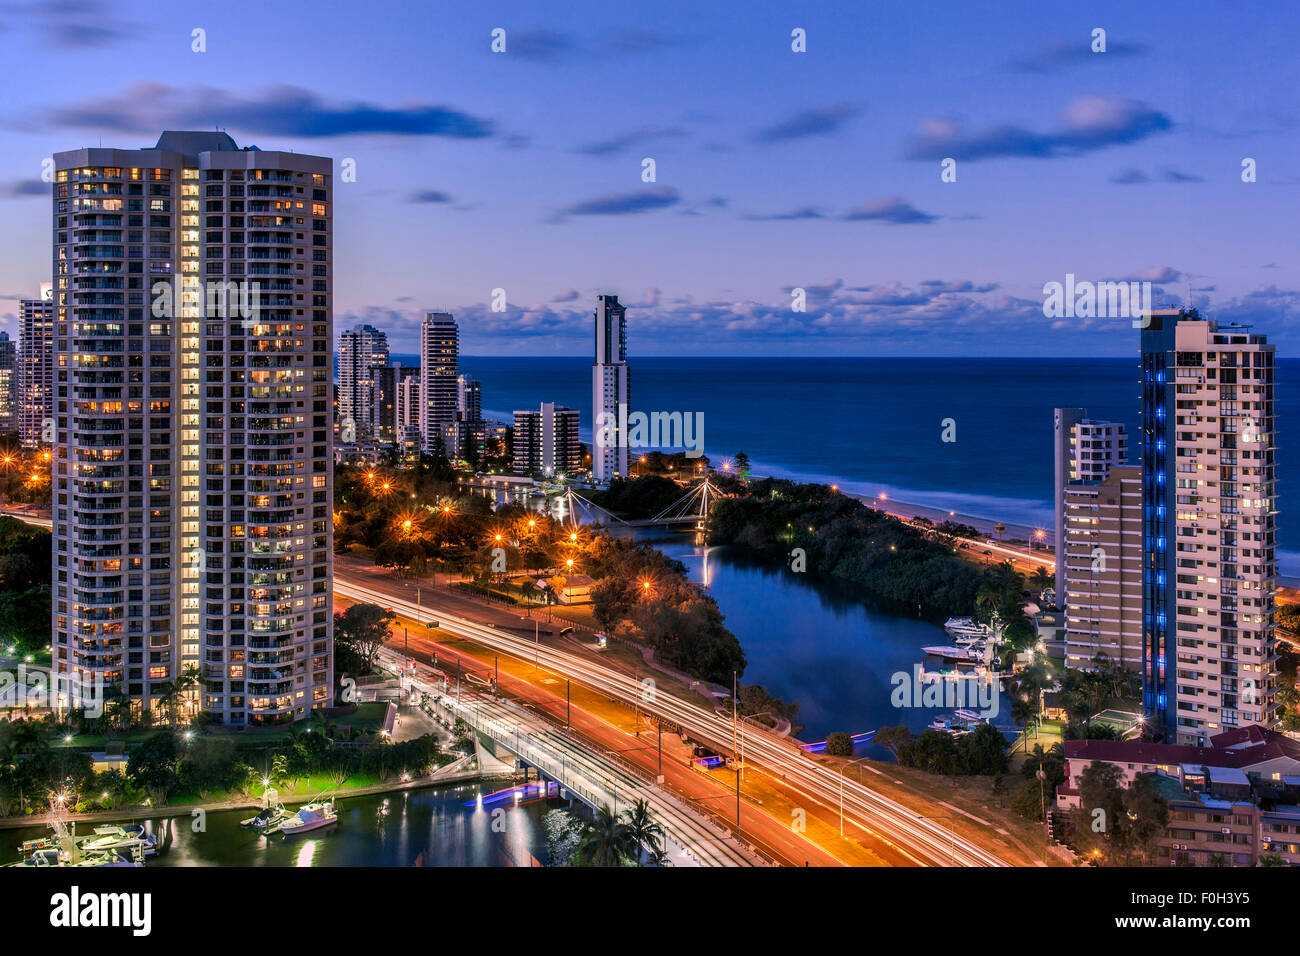 Night landscape showing high rise buildings next to the beach and ocean on the Gold Coast in Queensland Australia Stock Photo